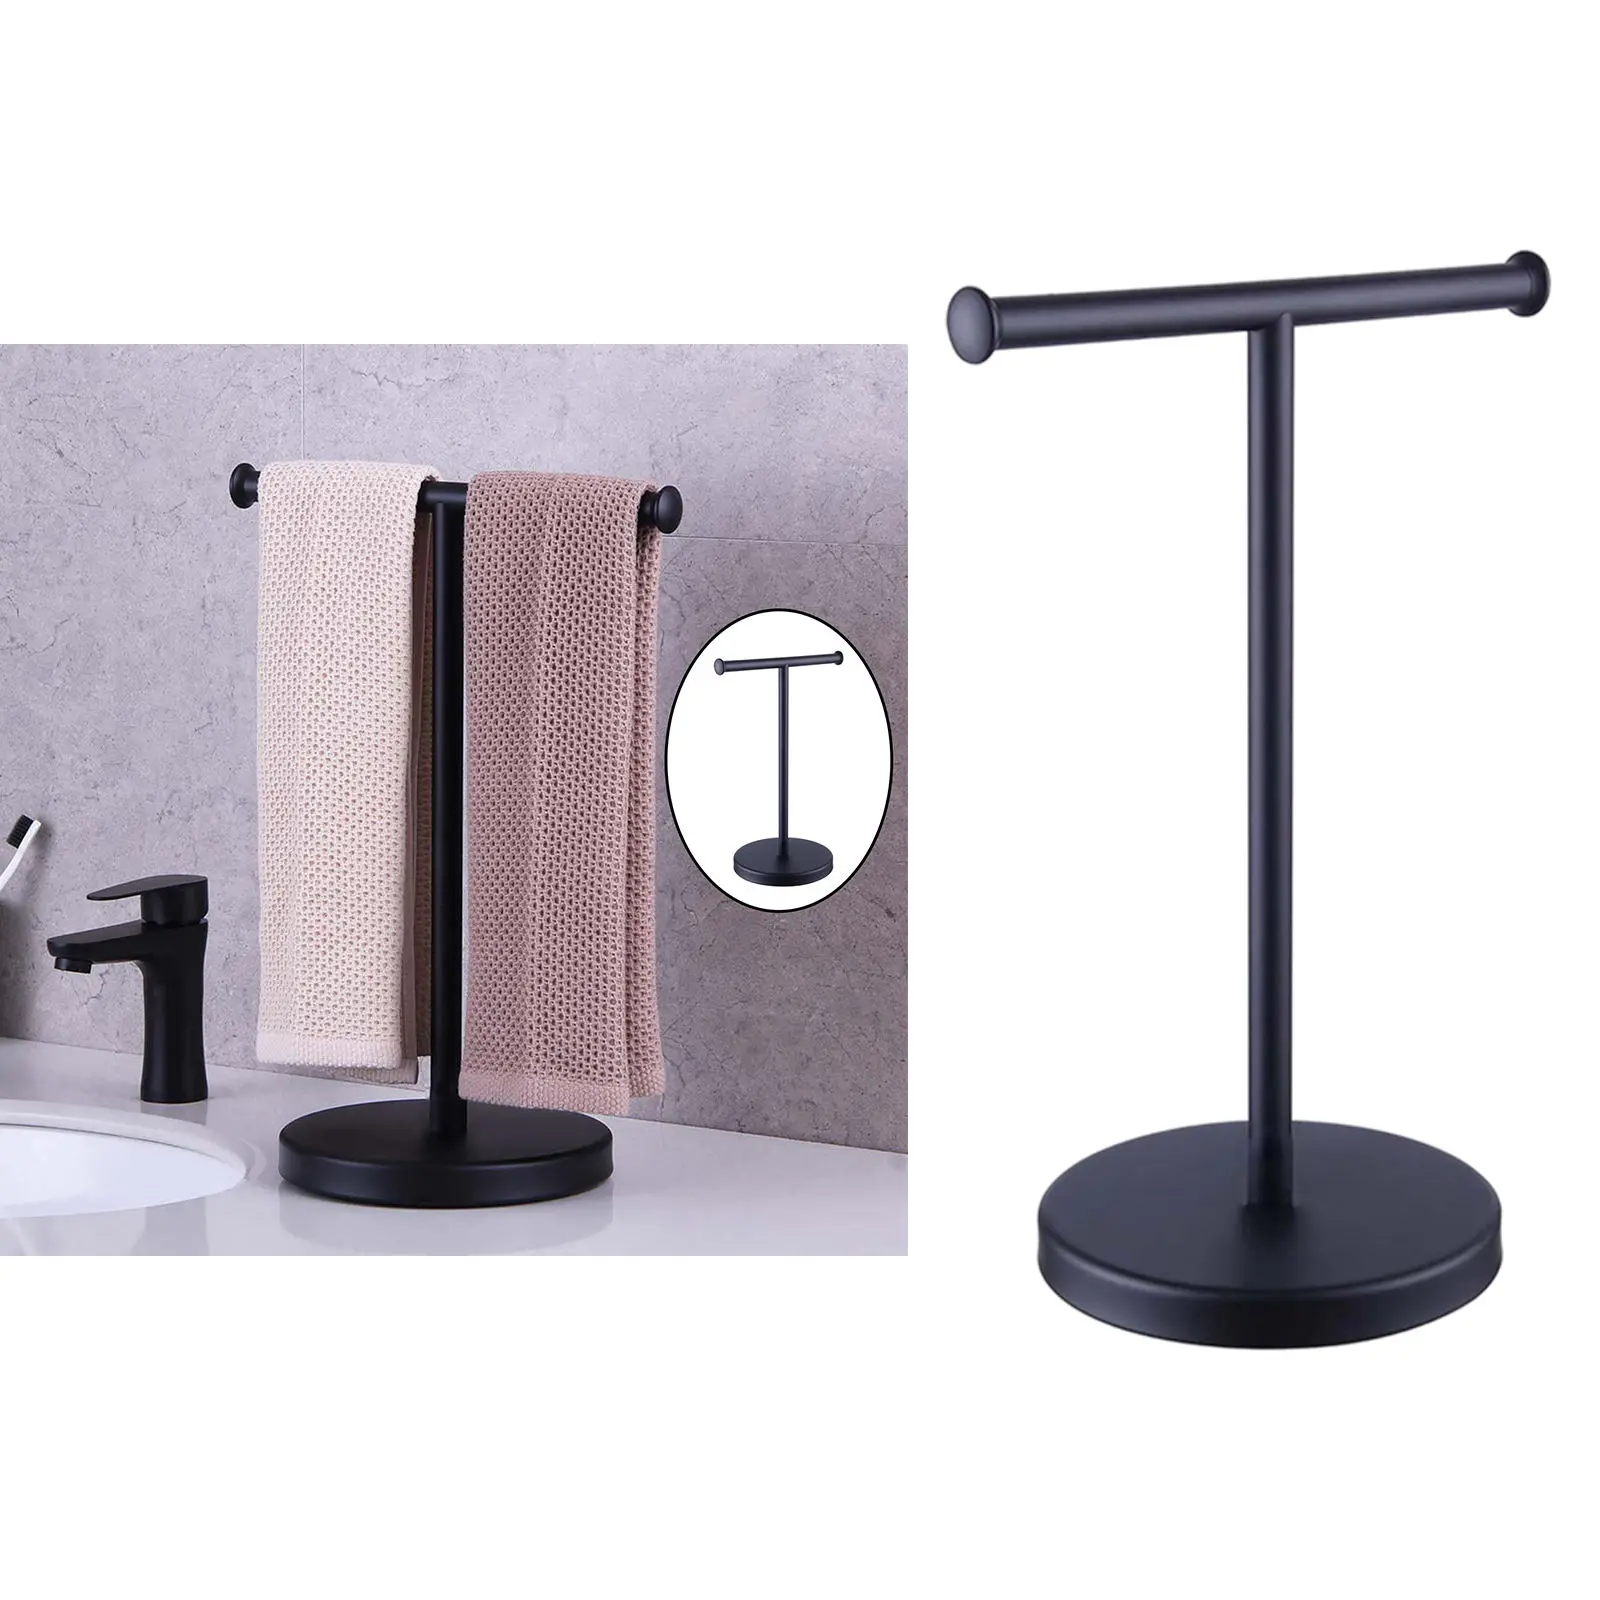 Stainless Steel Jewelry Standing Movable Accessories T Shape Towel Holder Stand Towel Rack Bath Stand for Home Bathroom Kitchen